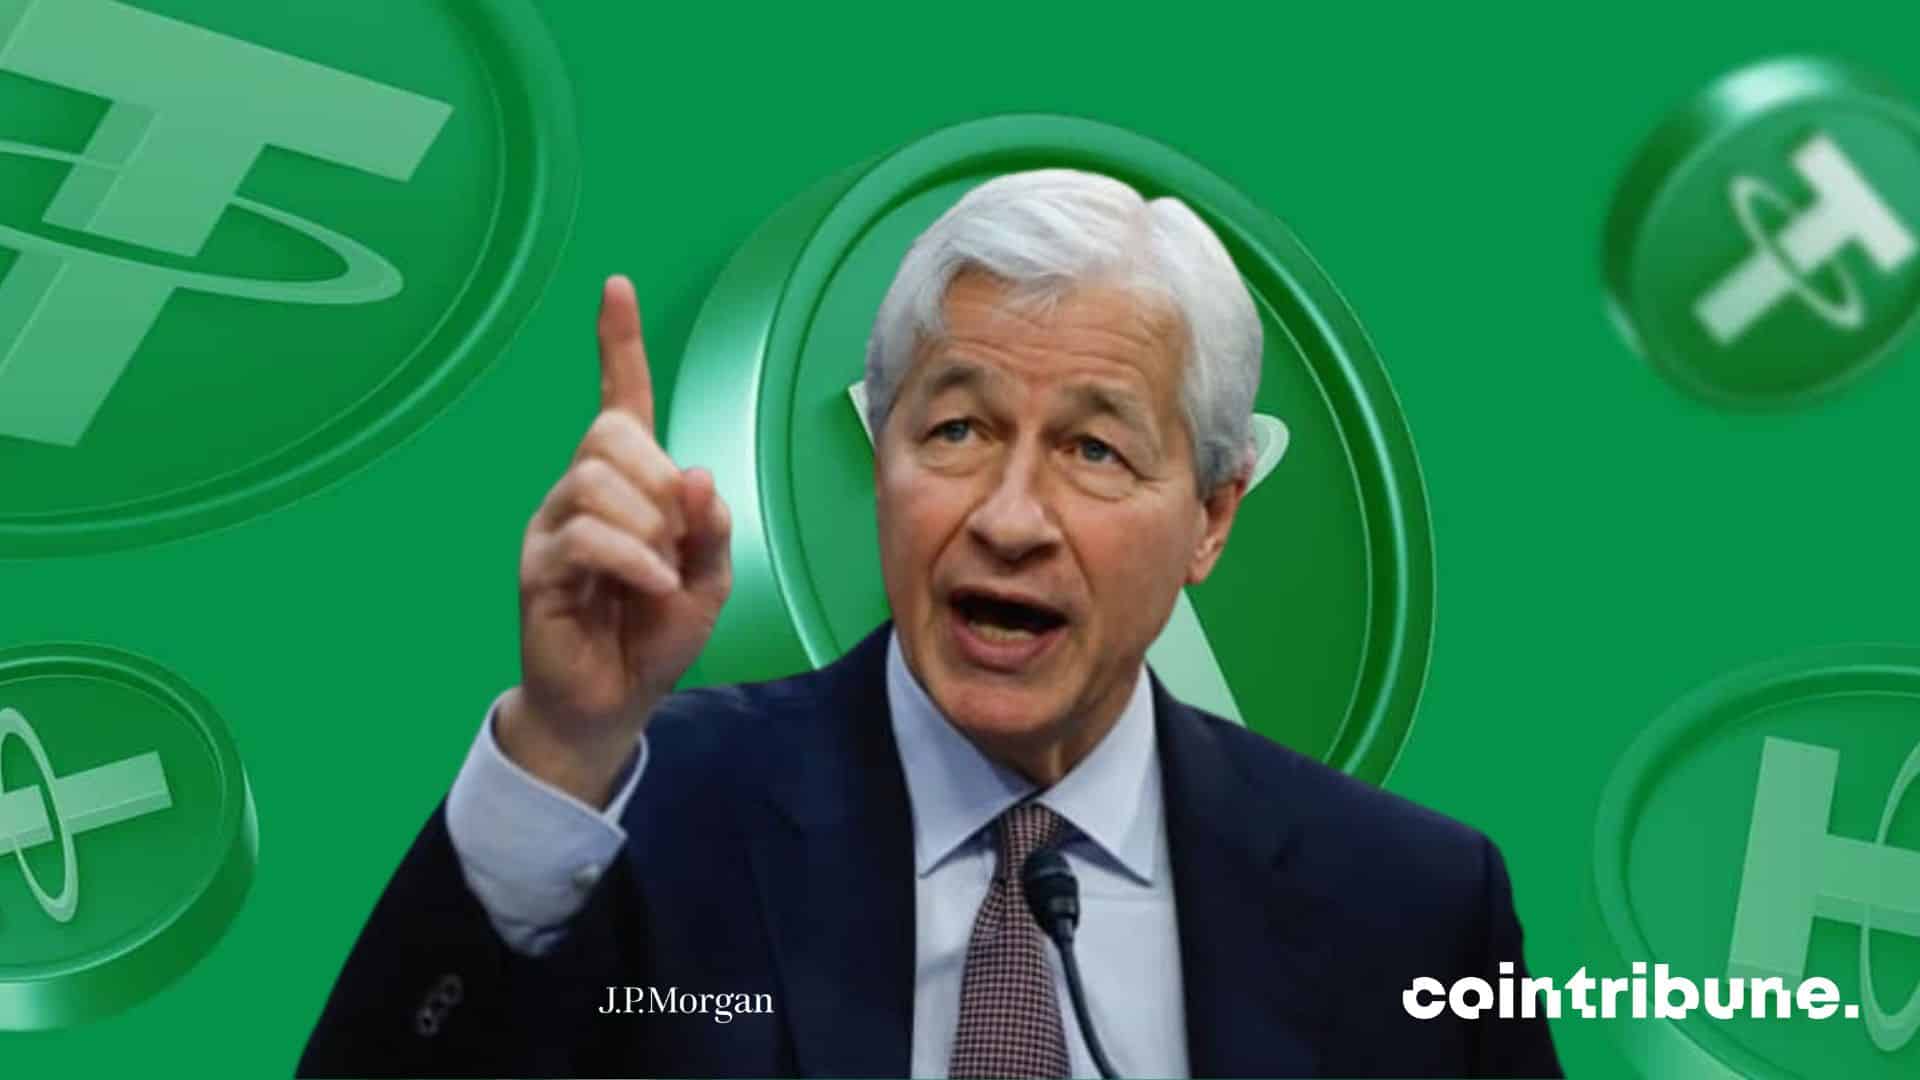 The dominance of Tether is dangerous for the crypto universe - According to JPMorgan